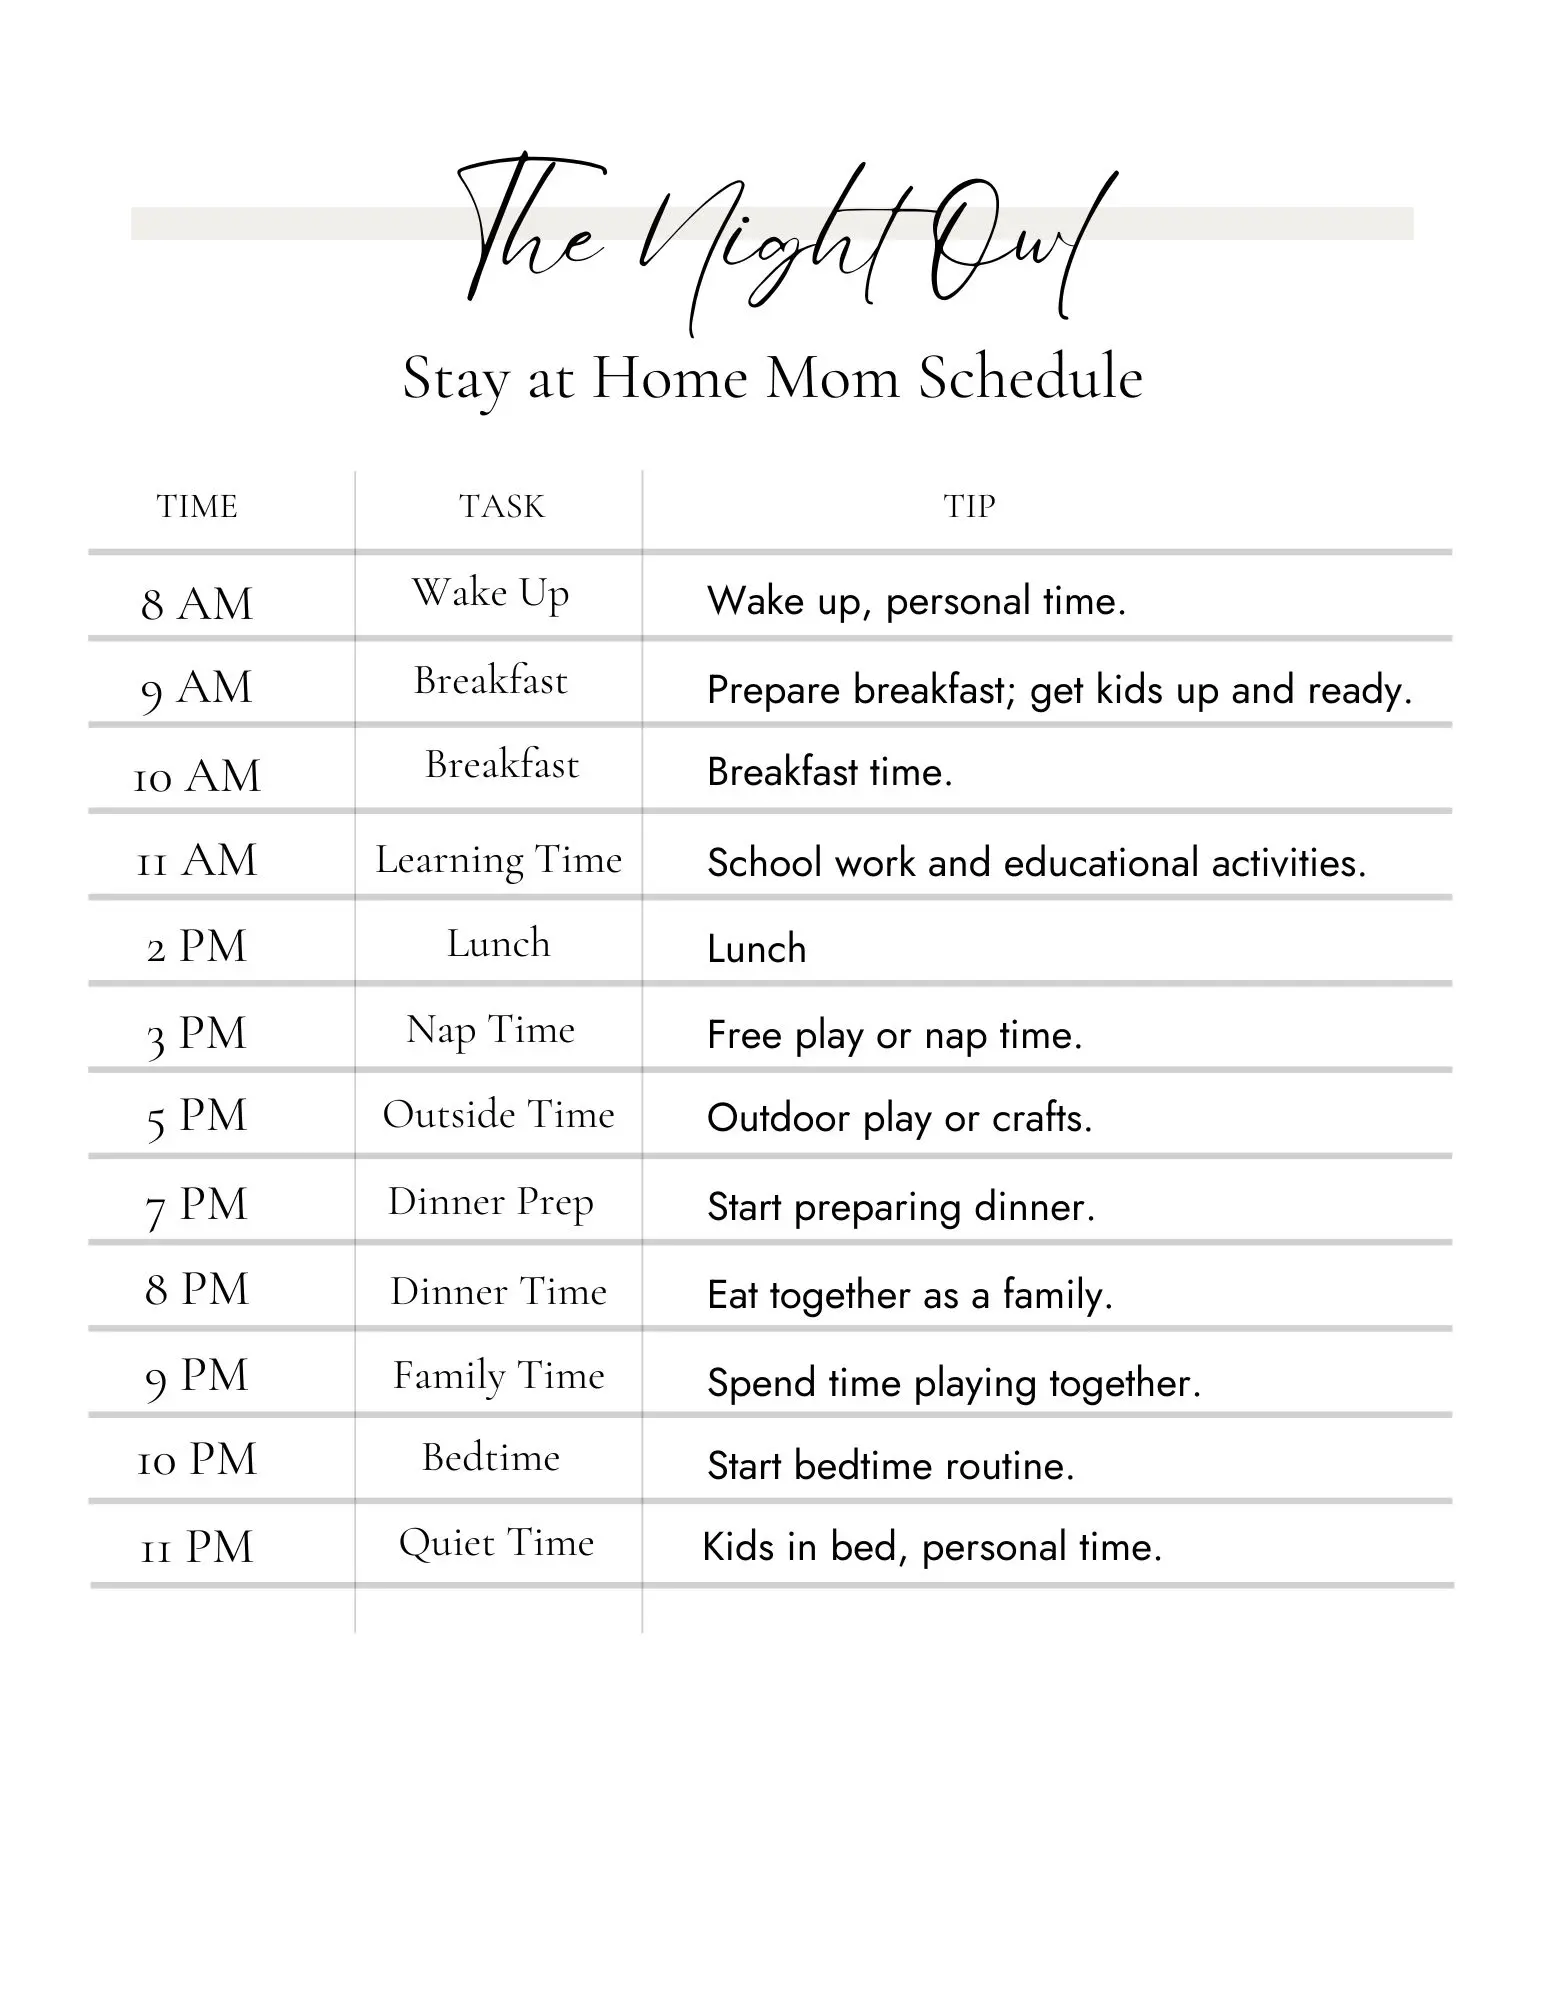 image of a stay at home mom schedule for a night owl